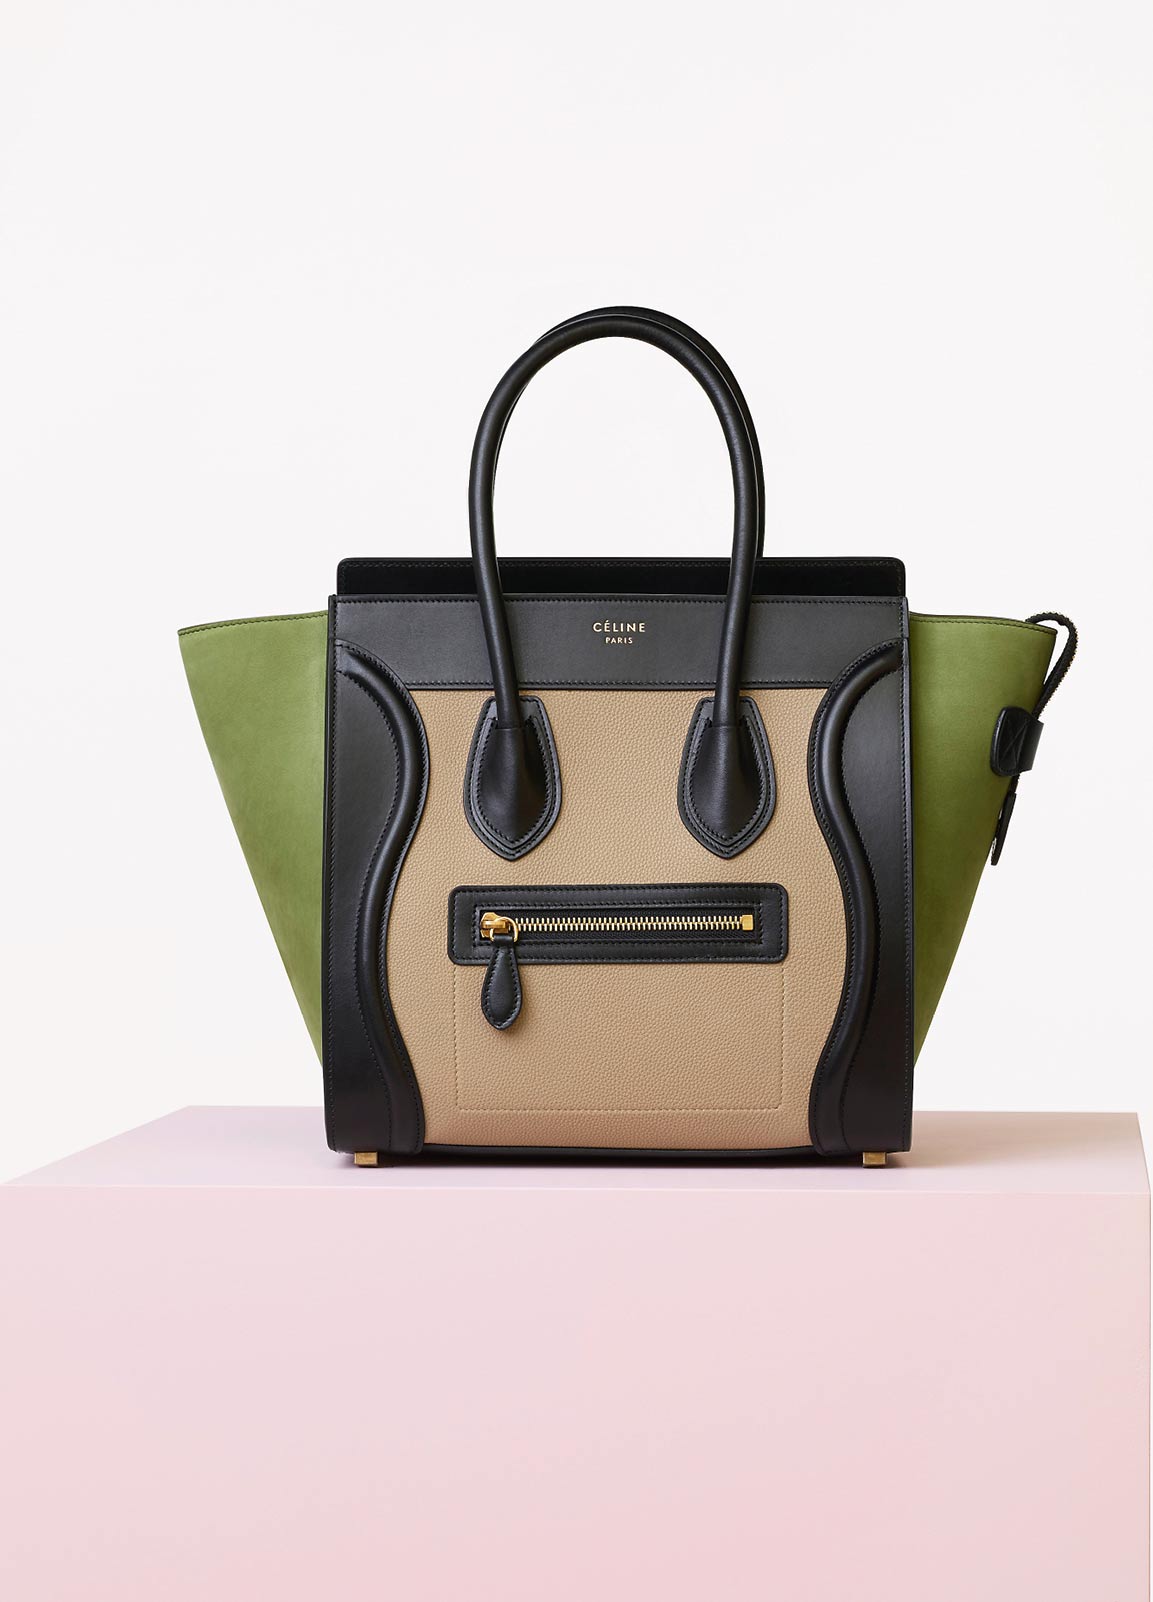 Celine Resort 2016 Bag Collection Featuring New Saddle Bags – Spotted ...